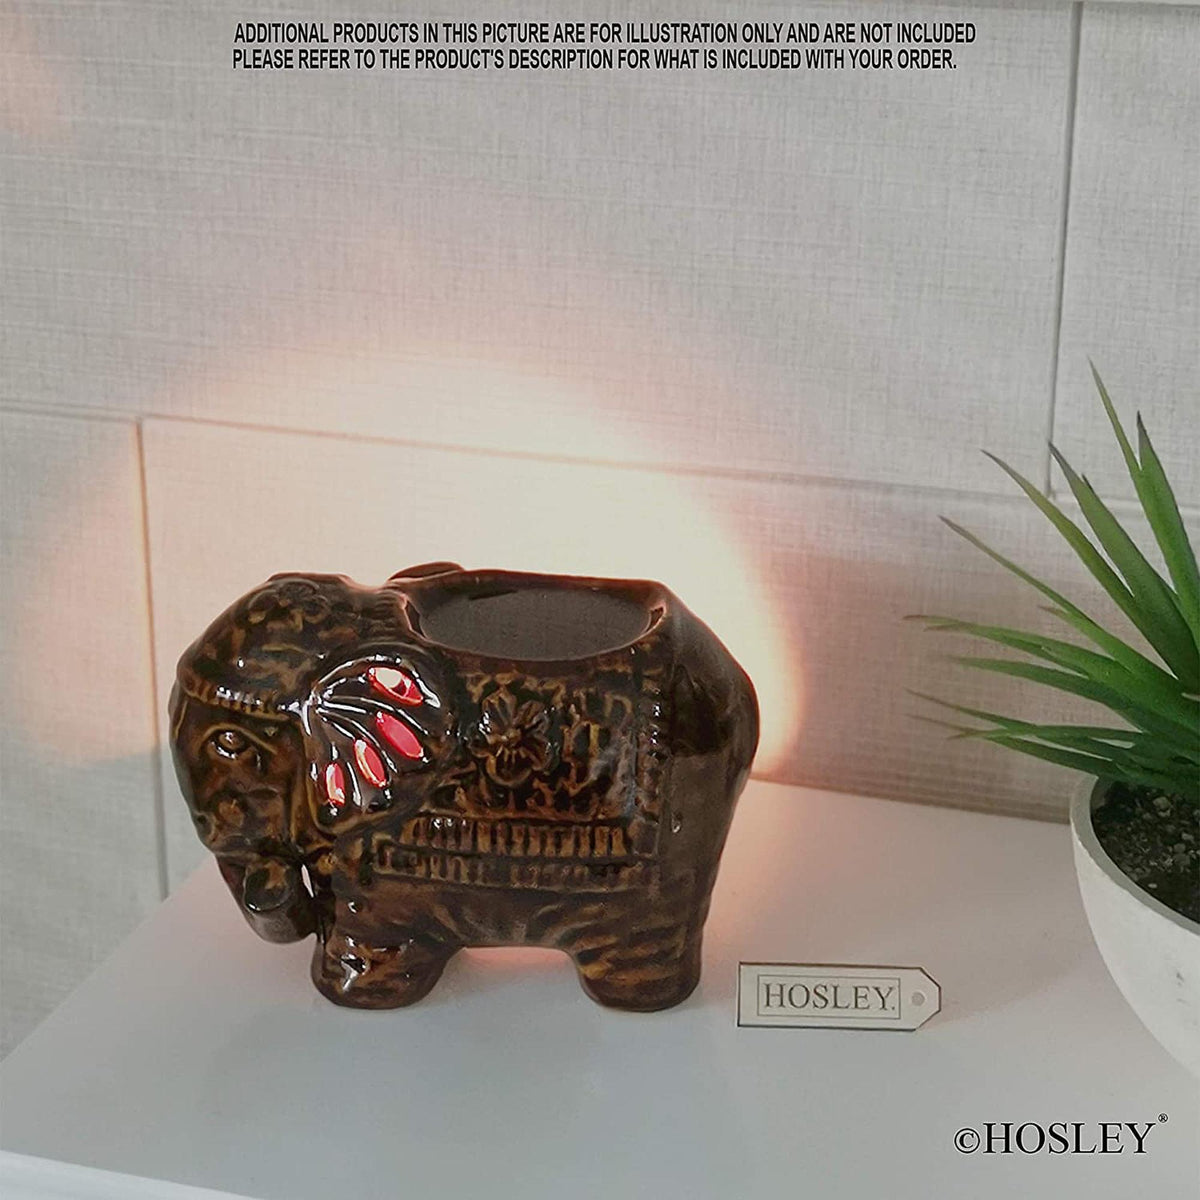 HOSLEY® Ceramic Oil Warmers, Elephant,   6 Inches Long